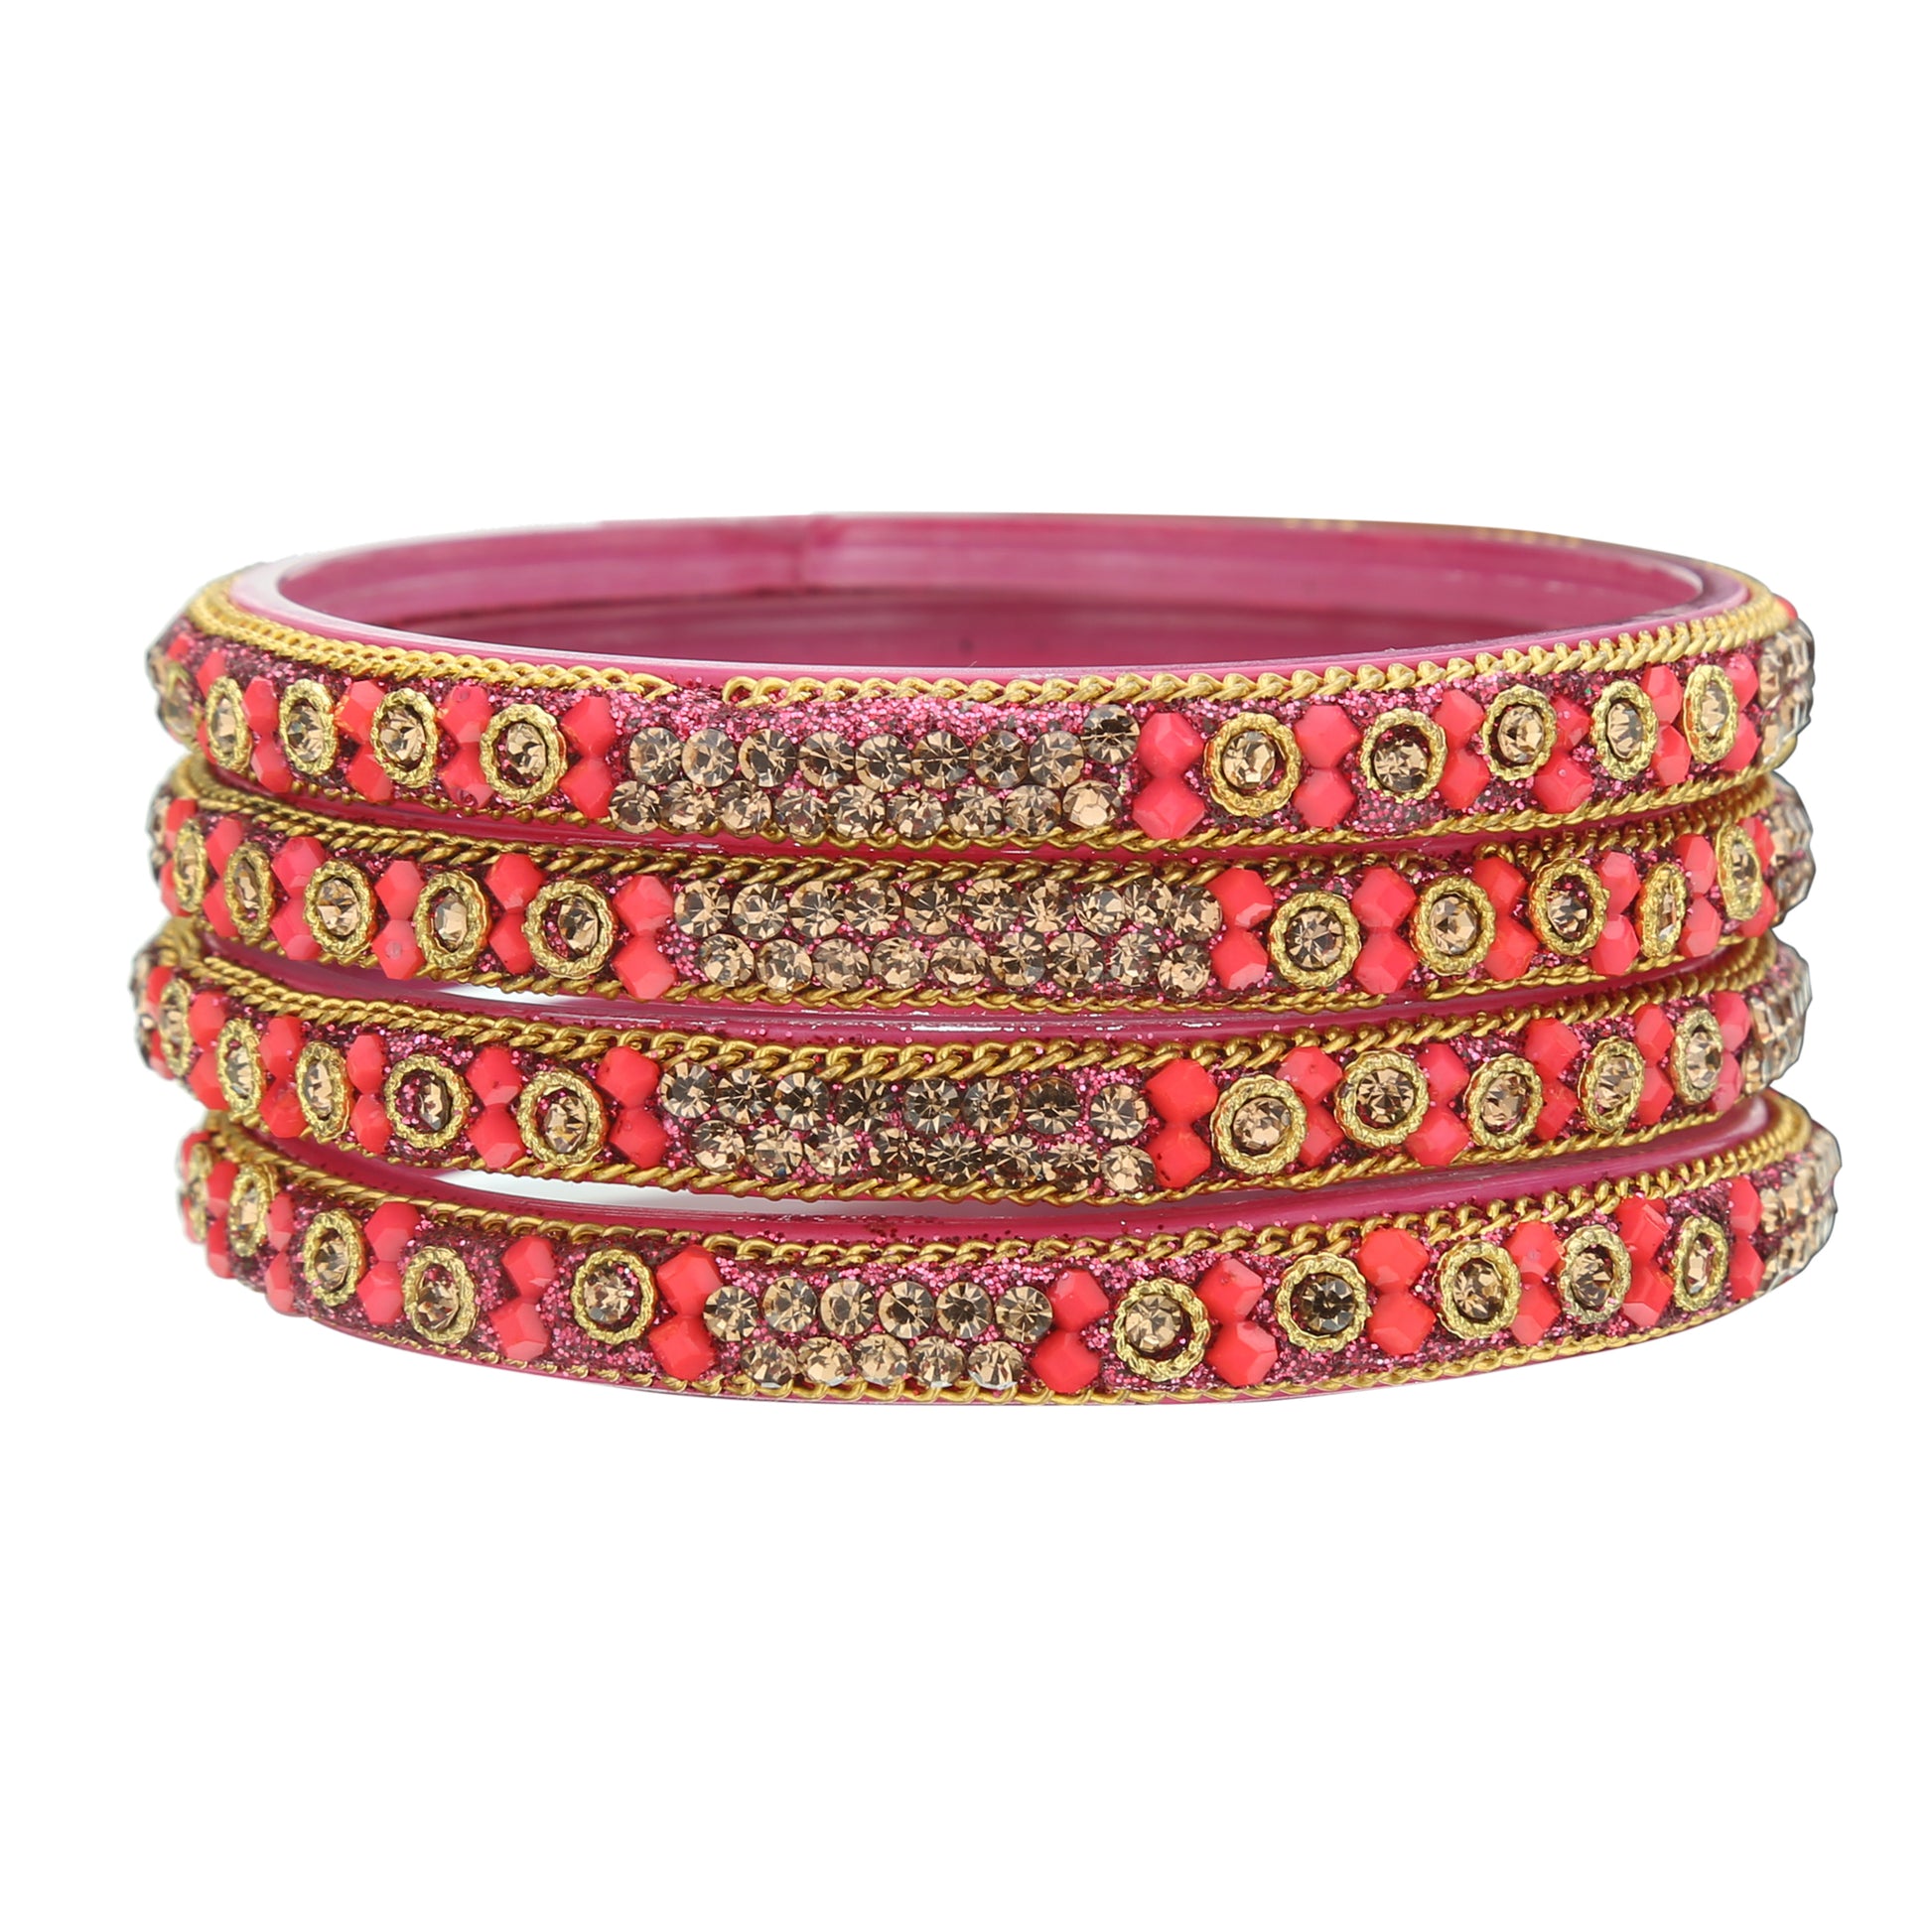 sukriti handcrafted glossy zircon crystal pink glass bangles for women – set of 4